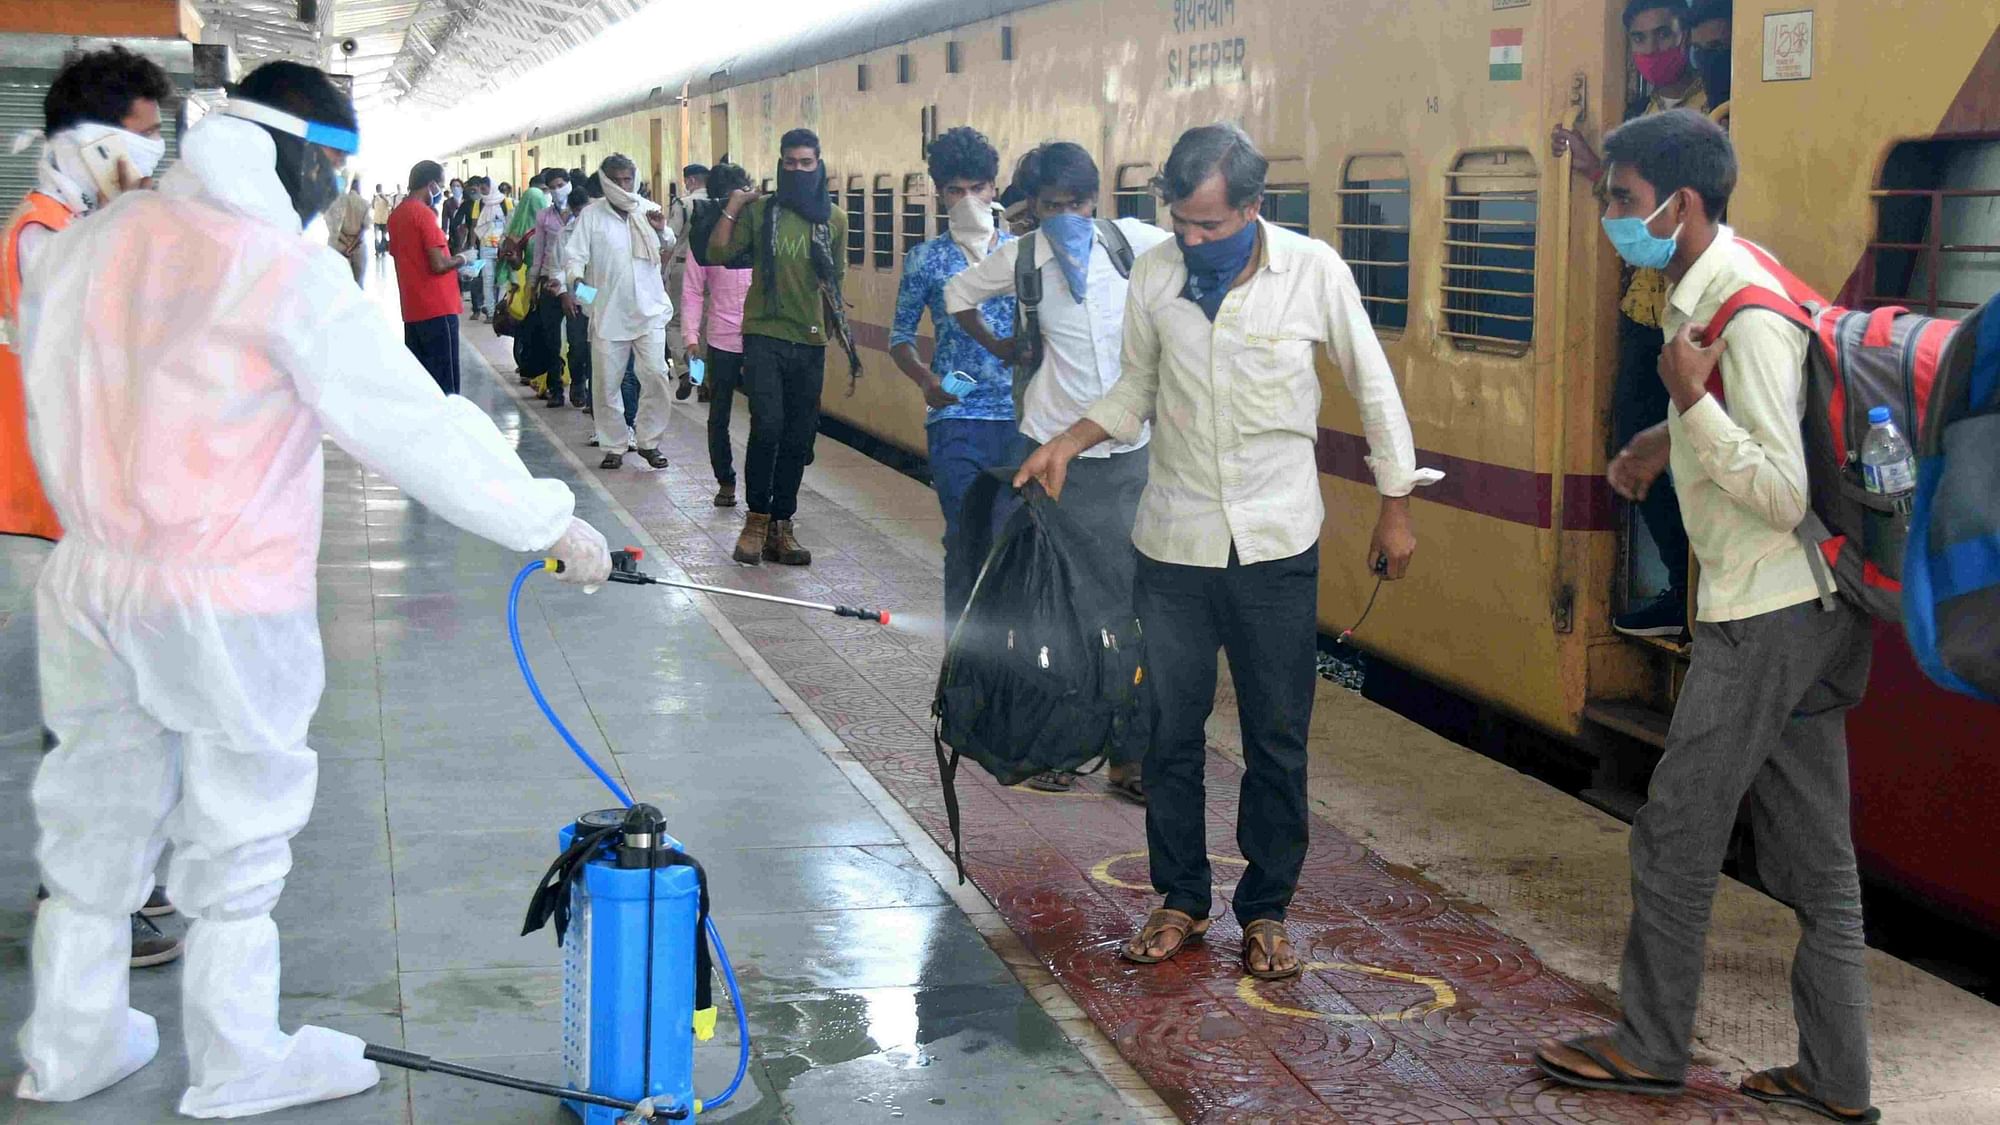 A worker sanitises the luggage of migrants who arrived from Mangalore by a shramik special train at the Jodhpur railway station on 16 May.